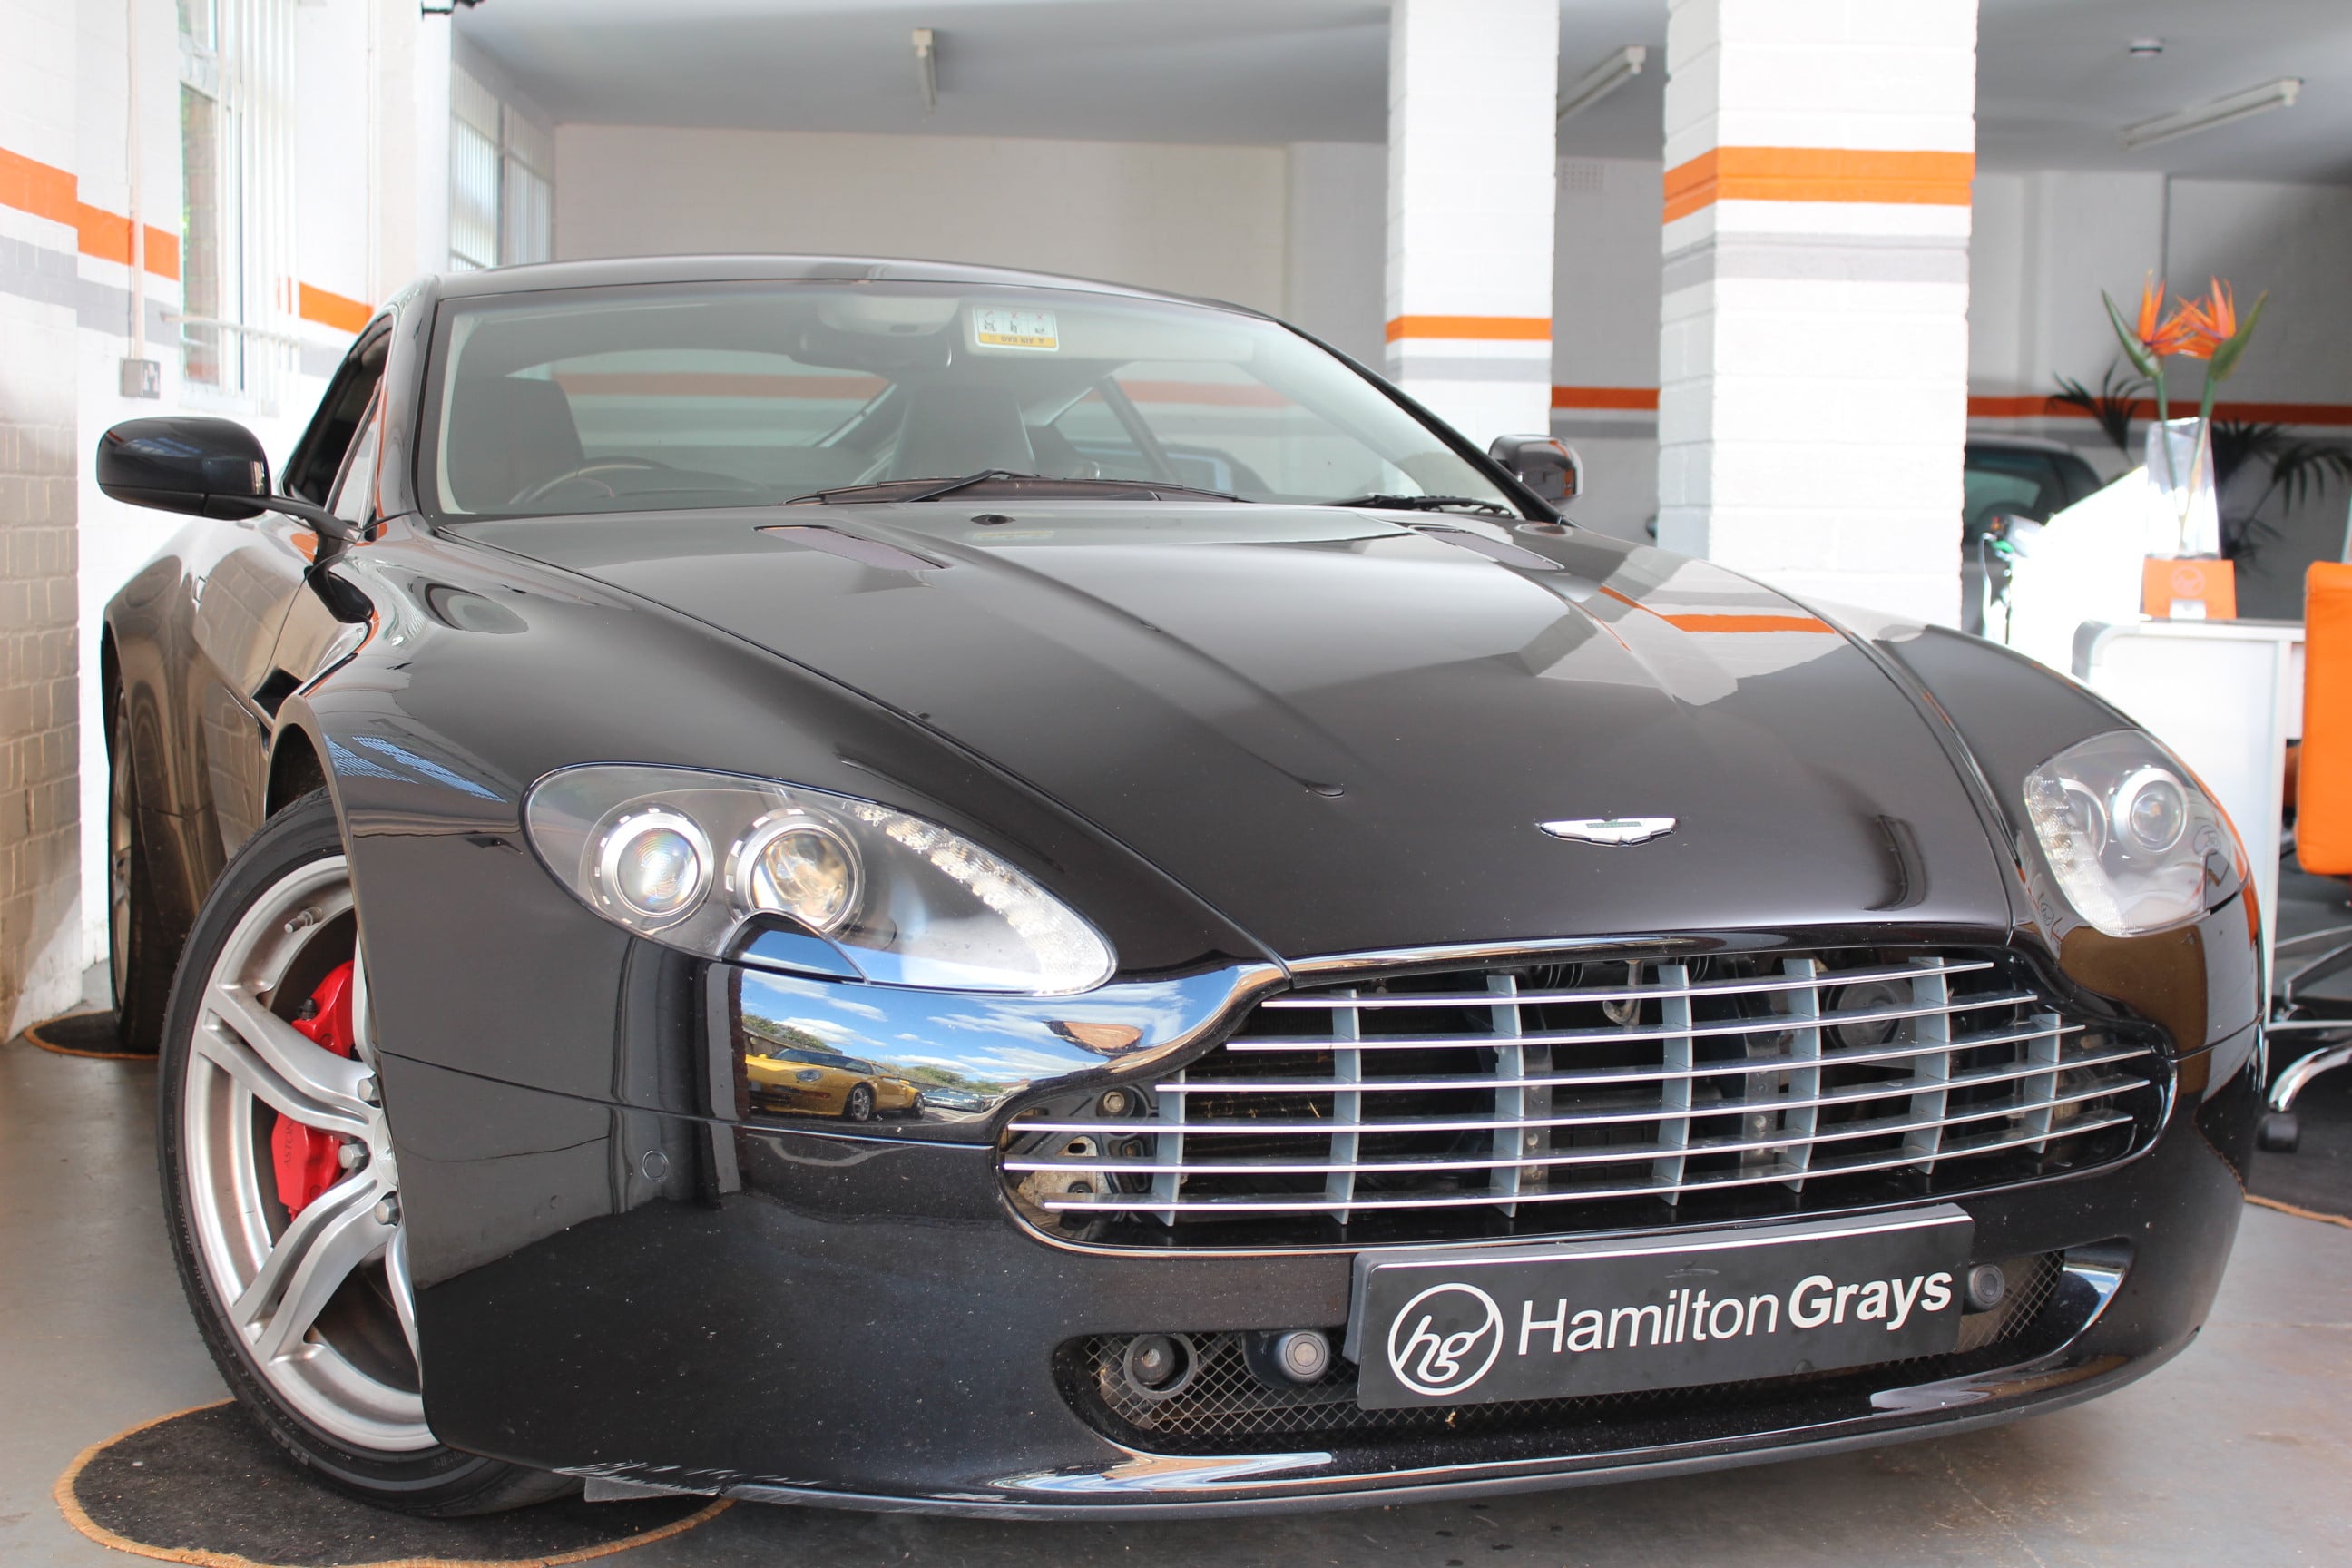 2009 59 ASTON MARTIN VANTAGE 4.7 V8 SPORT SHIFT FAMSH! JUST BEEN SERVICED! IN EXCELLENT CONDITION (SOLD)